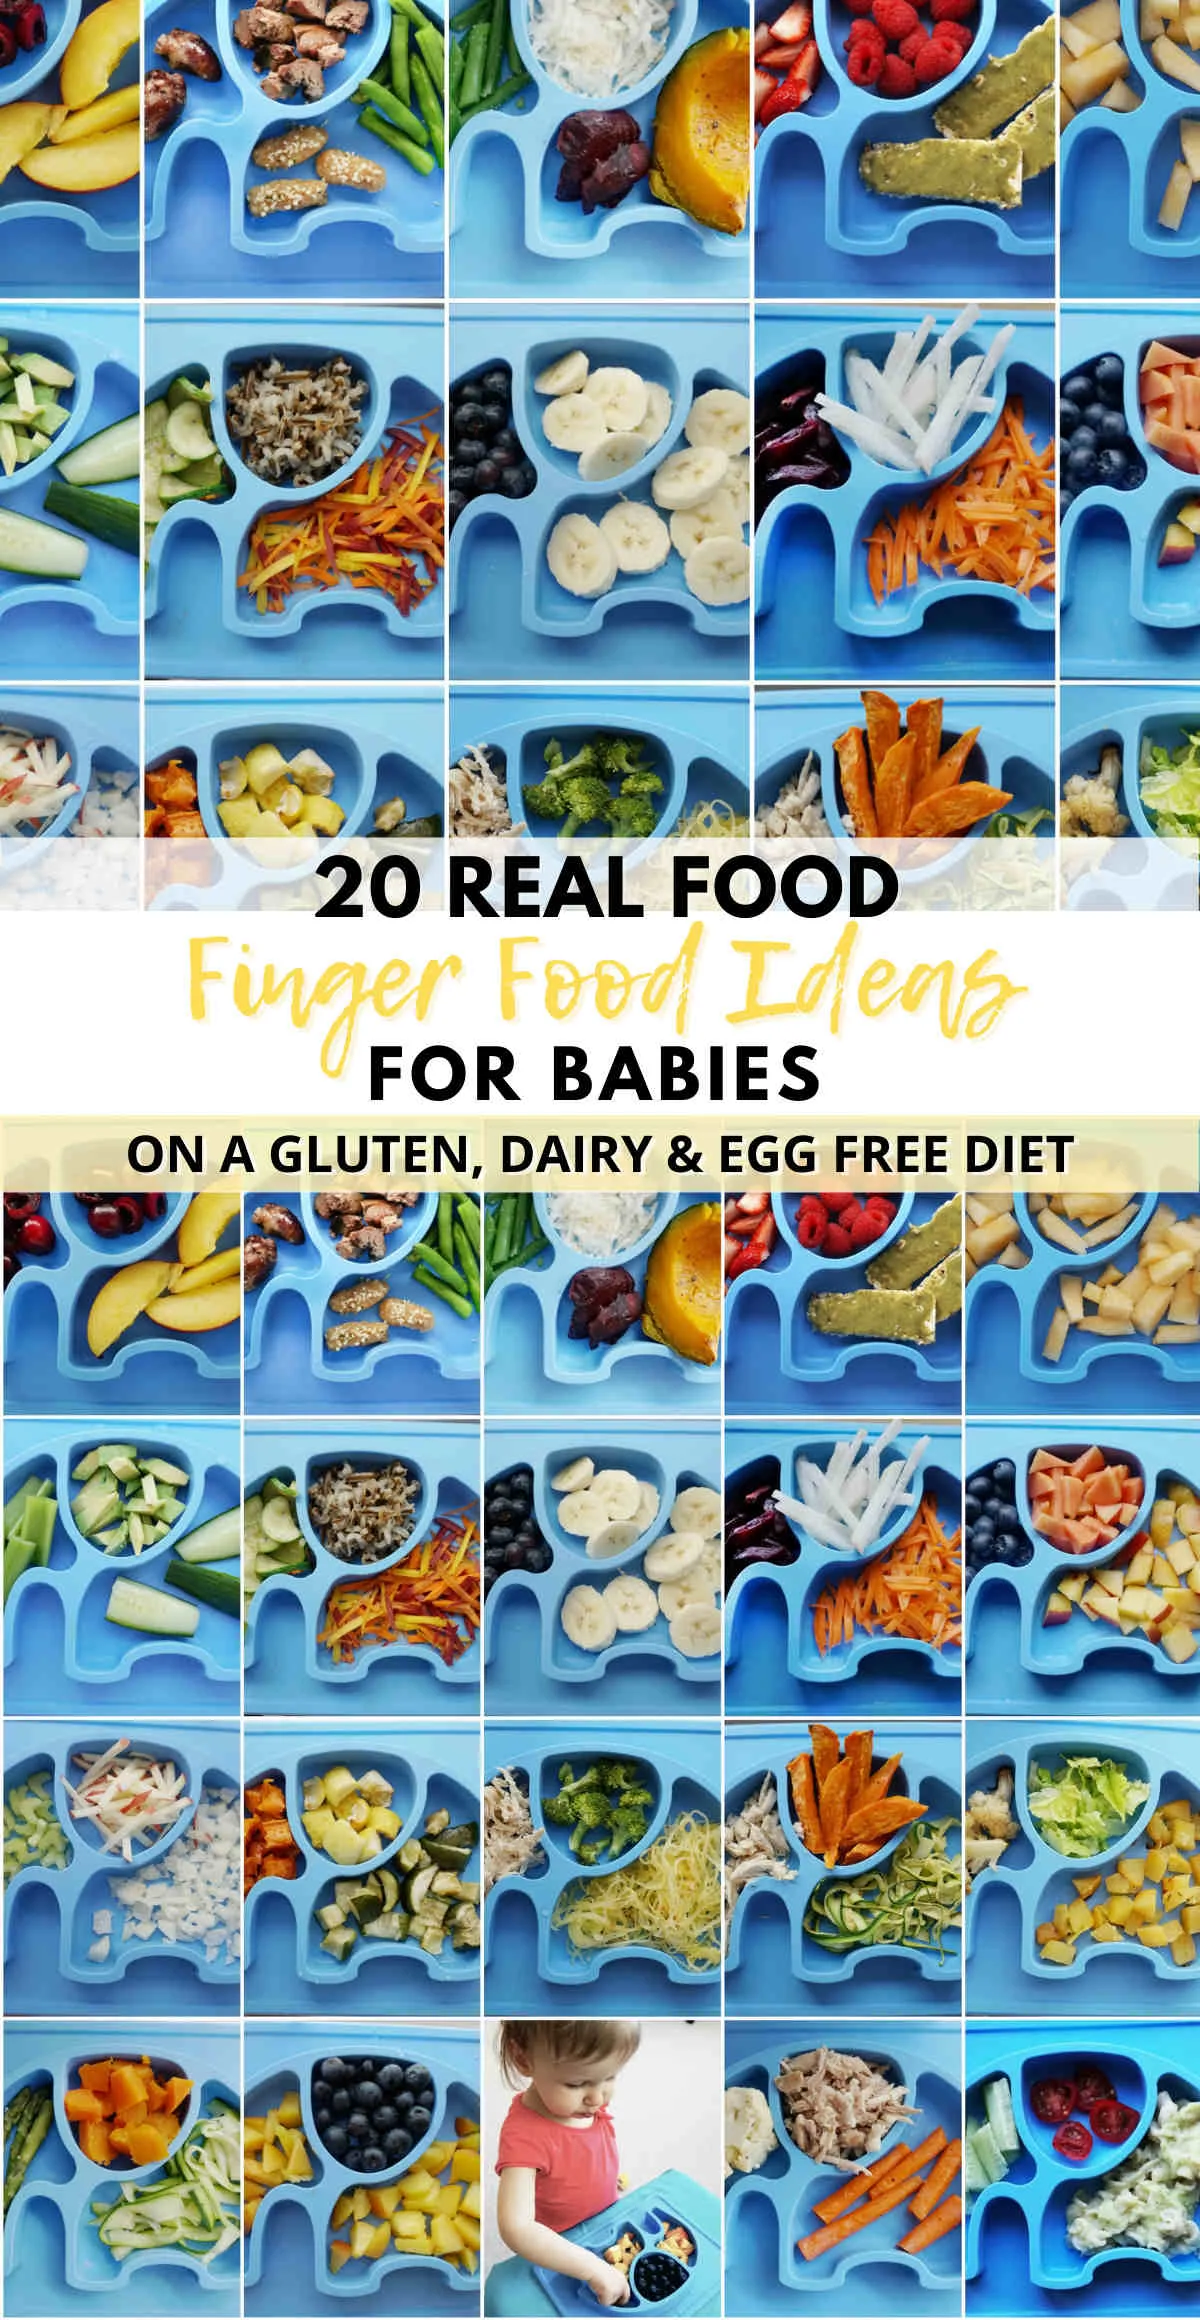 Best Early Finger Foods for Baby (With Tips, Visuals, and Recipes)